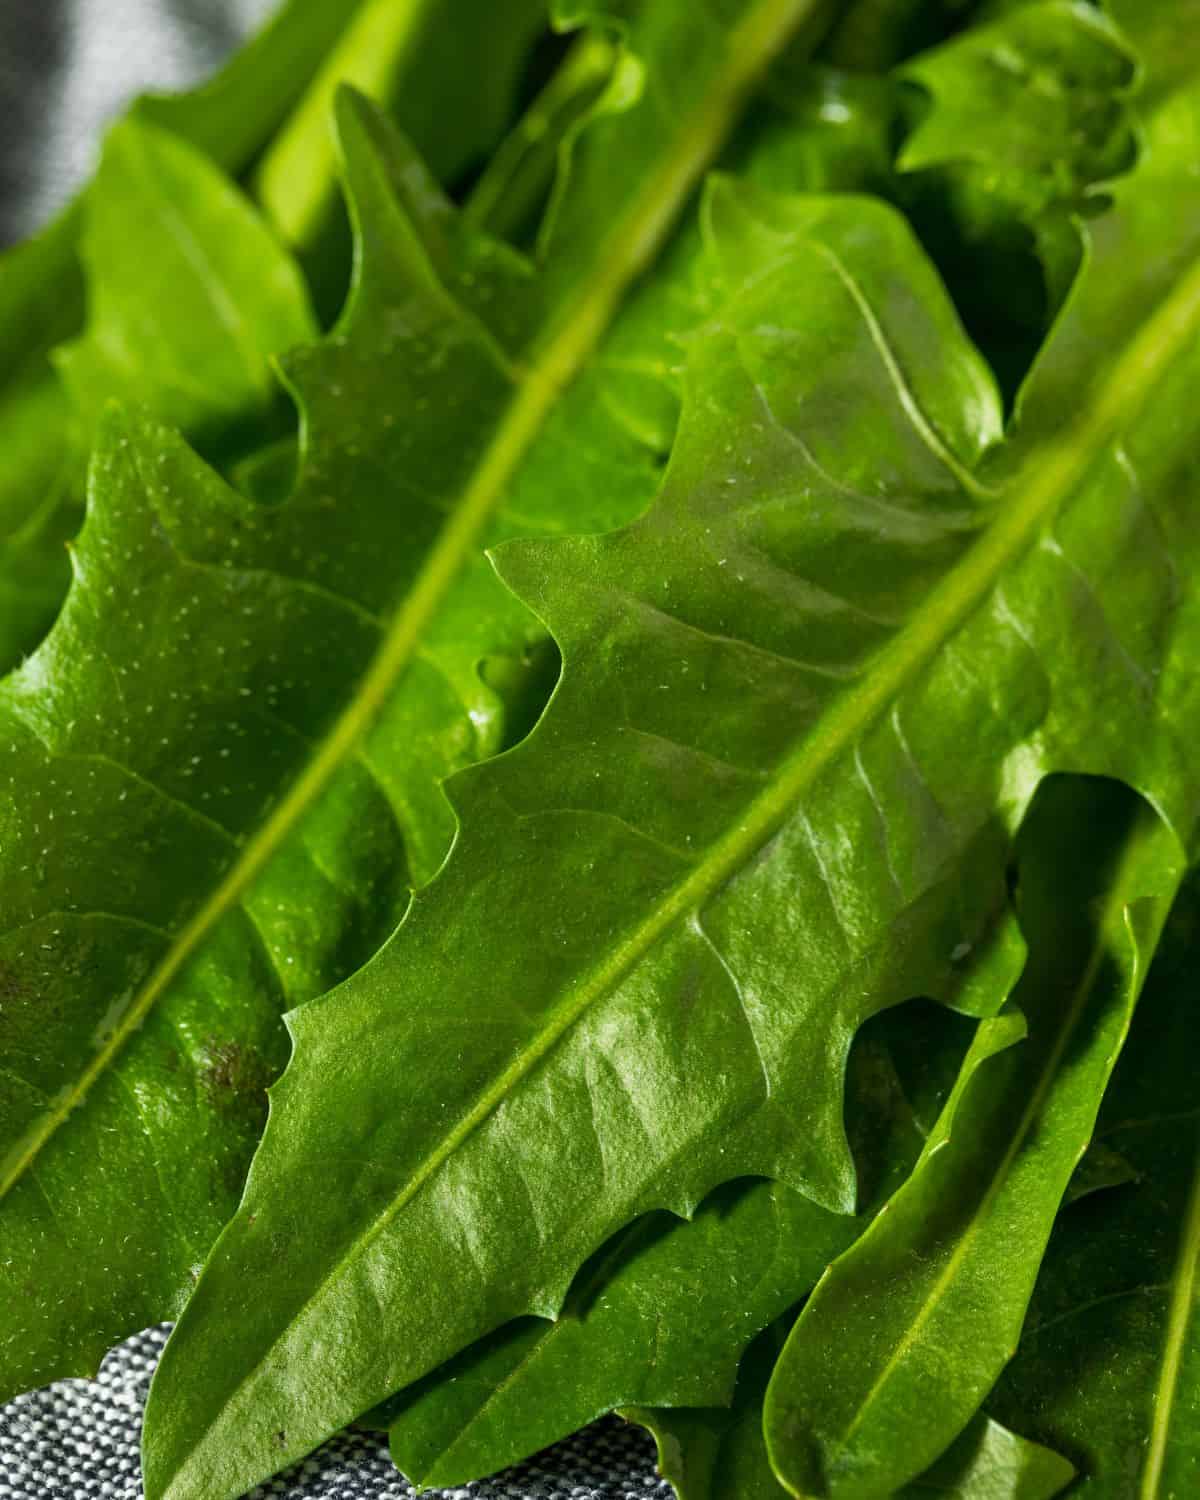 Up close image of dandelion greens that could be used as a substitute for arugula.